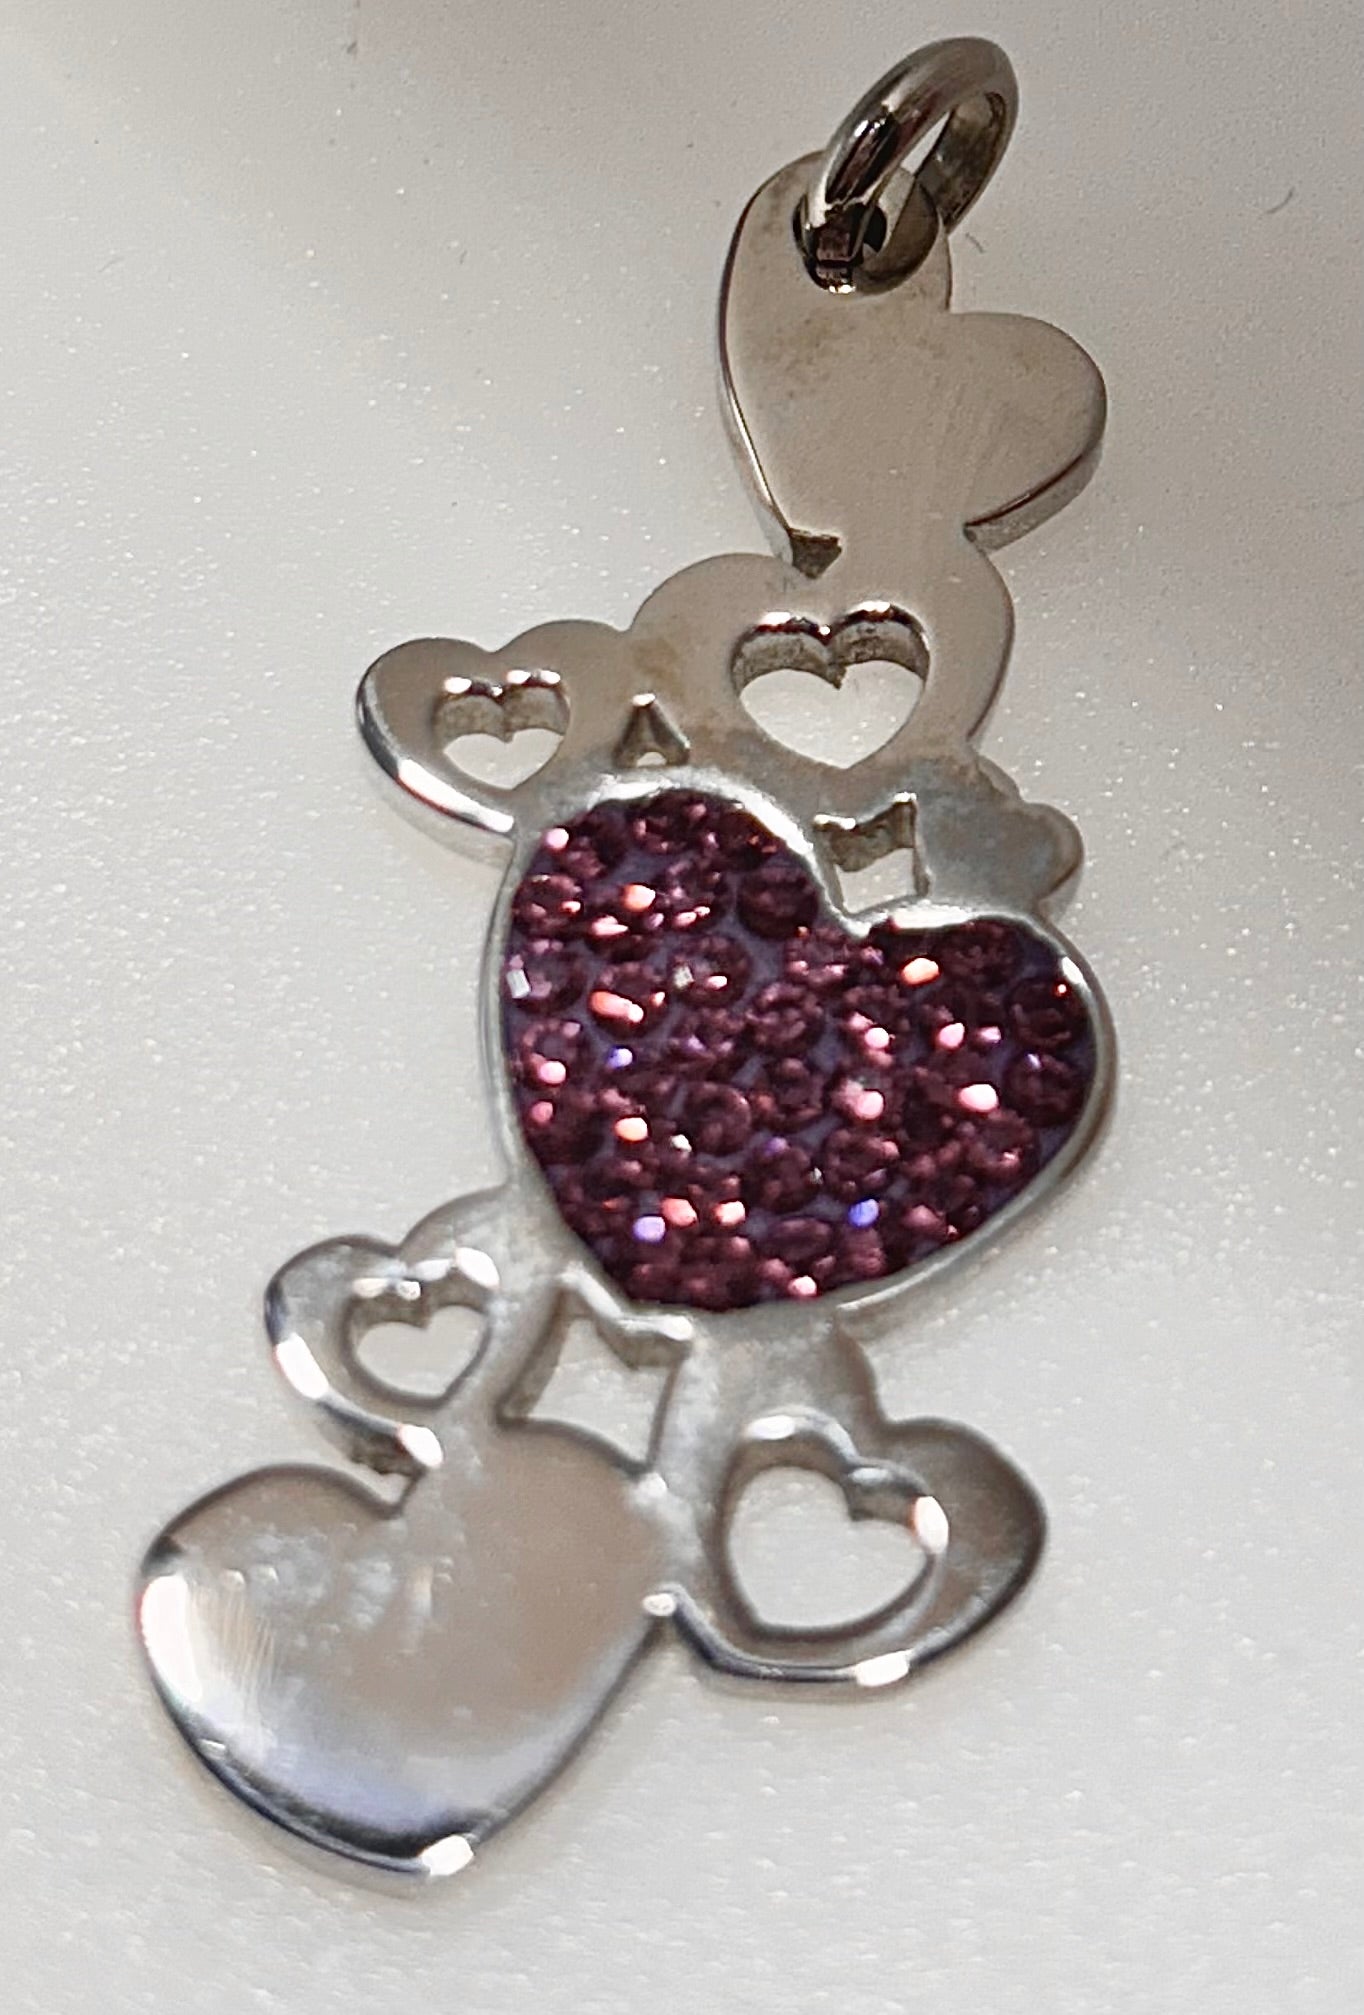 JEWELRY HEARTS WITH CRYSTAL CENTER HEART ON A CHAIN 18"